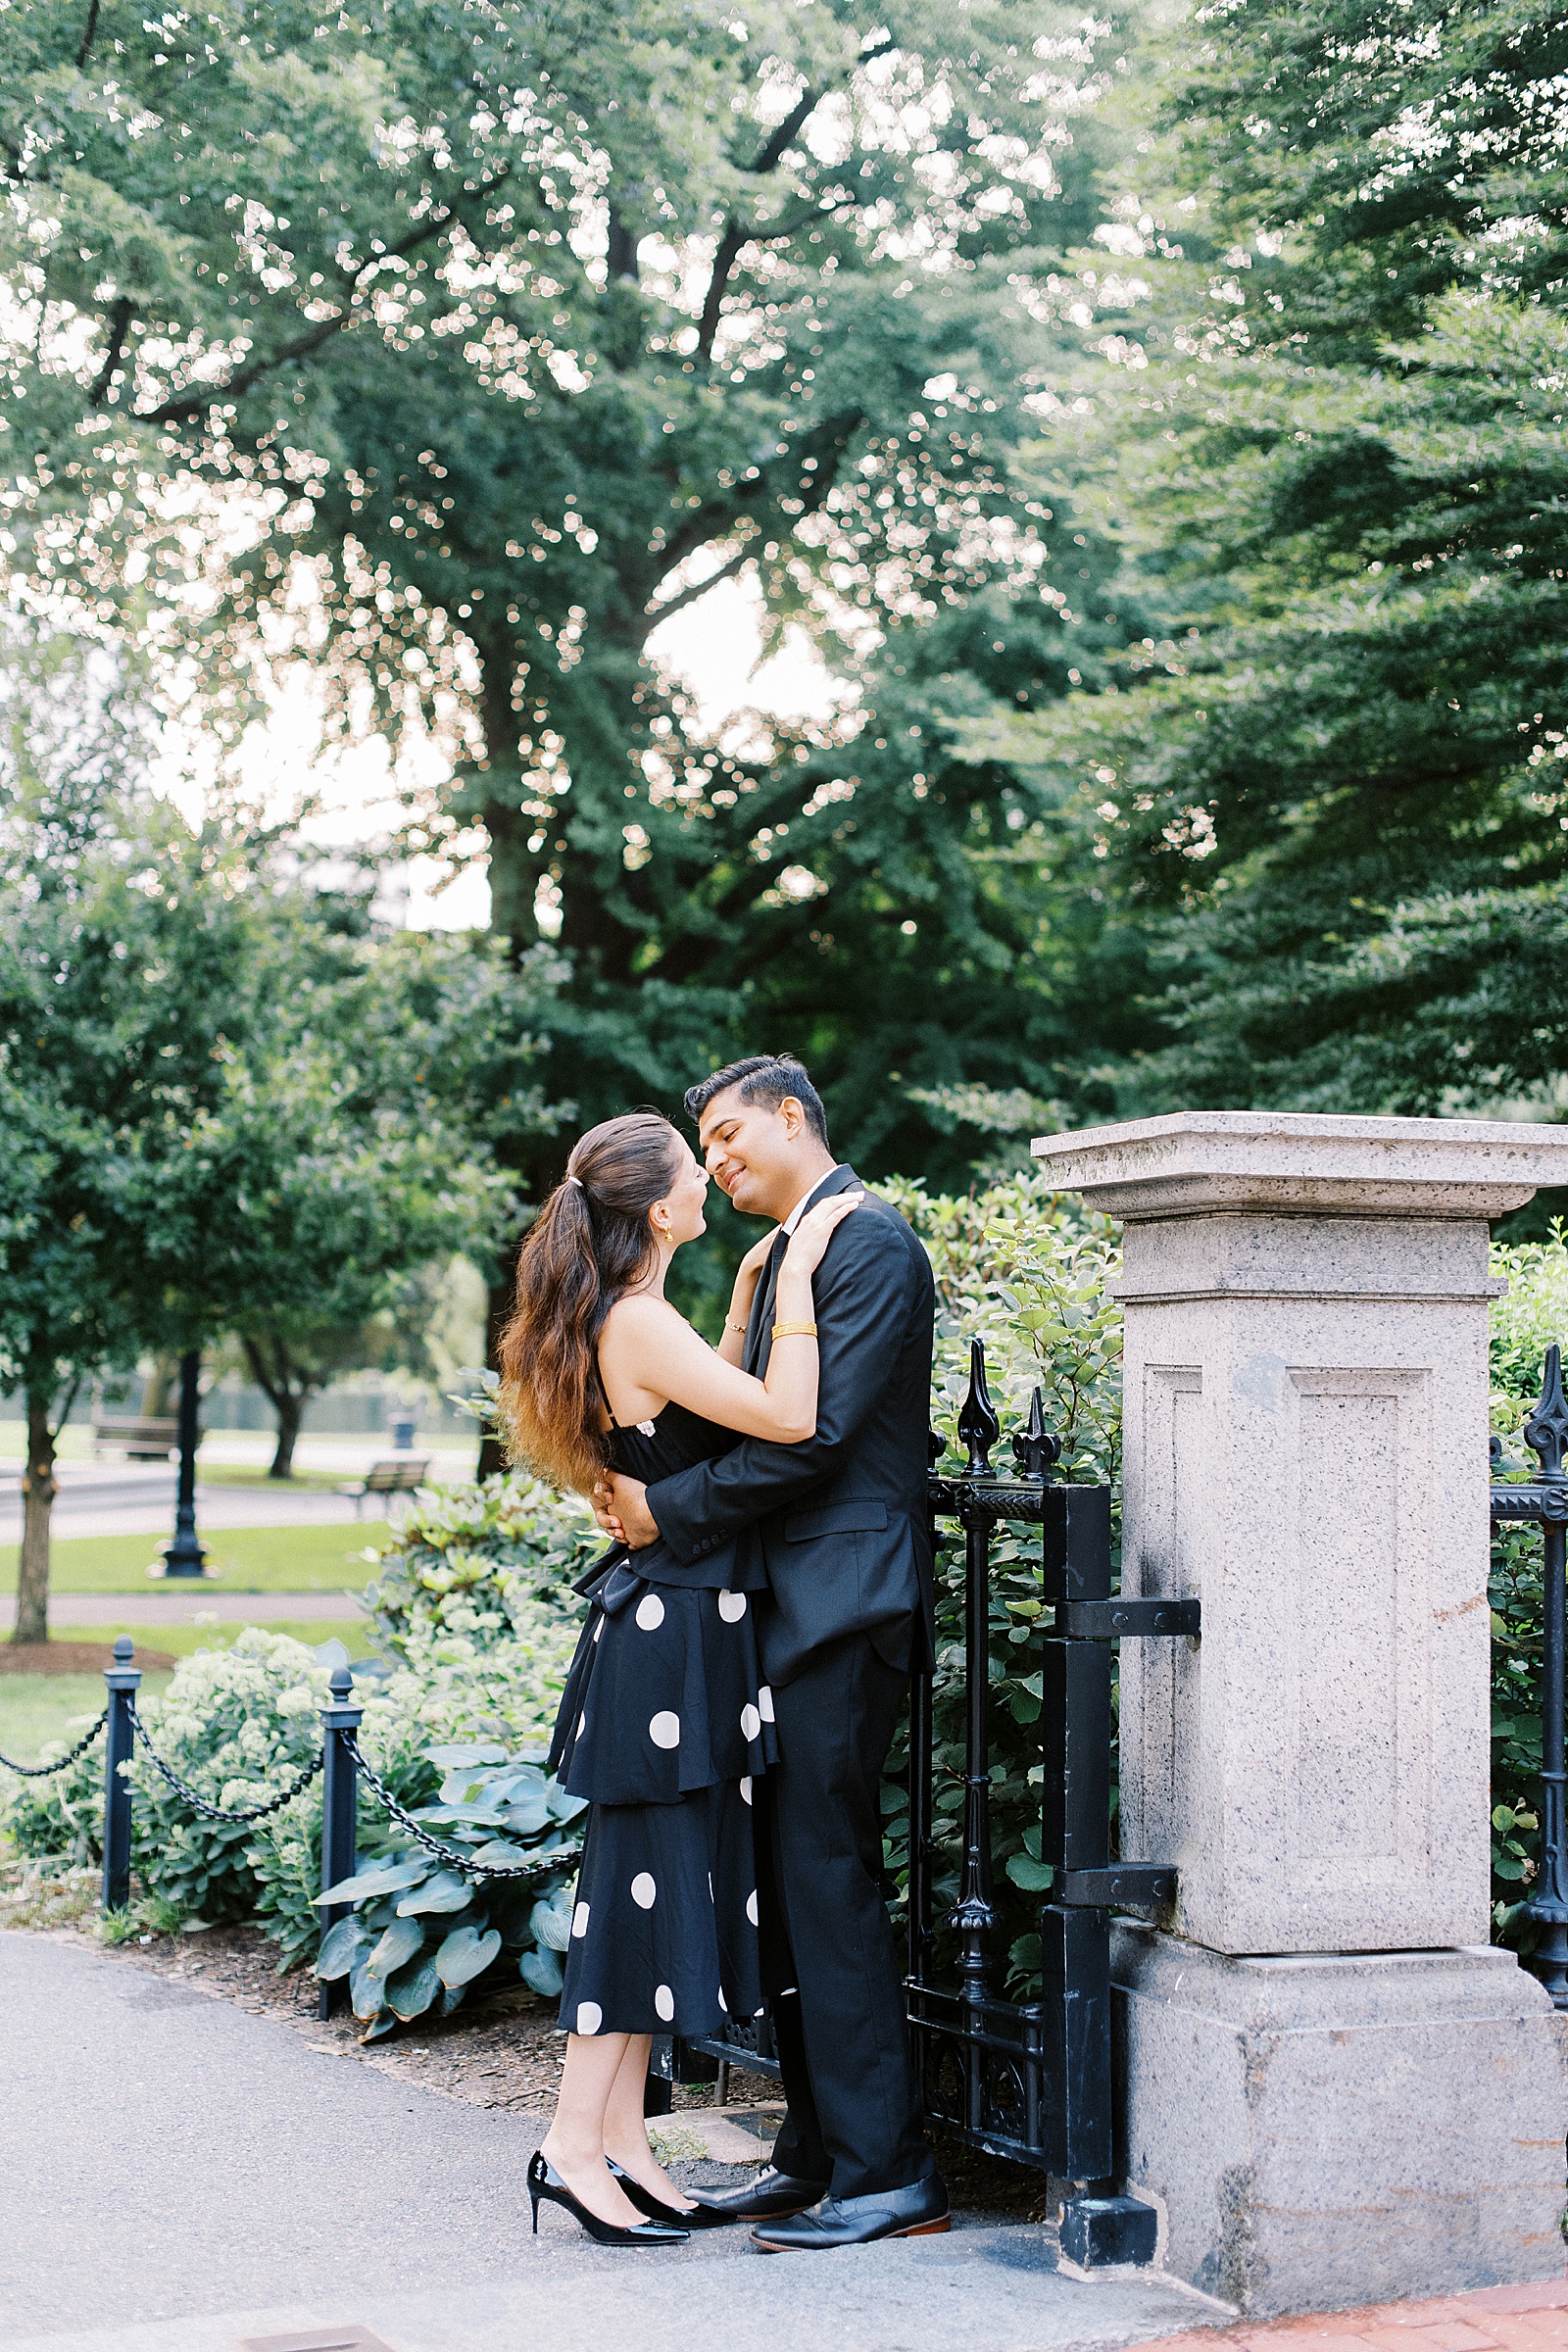 Woman in polka dot dress kissing man in black suit in a NY park